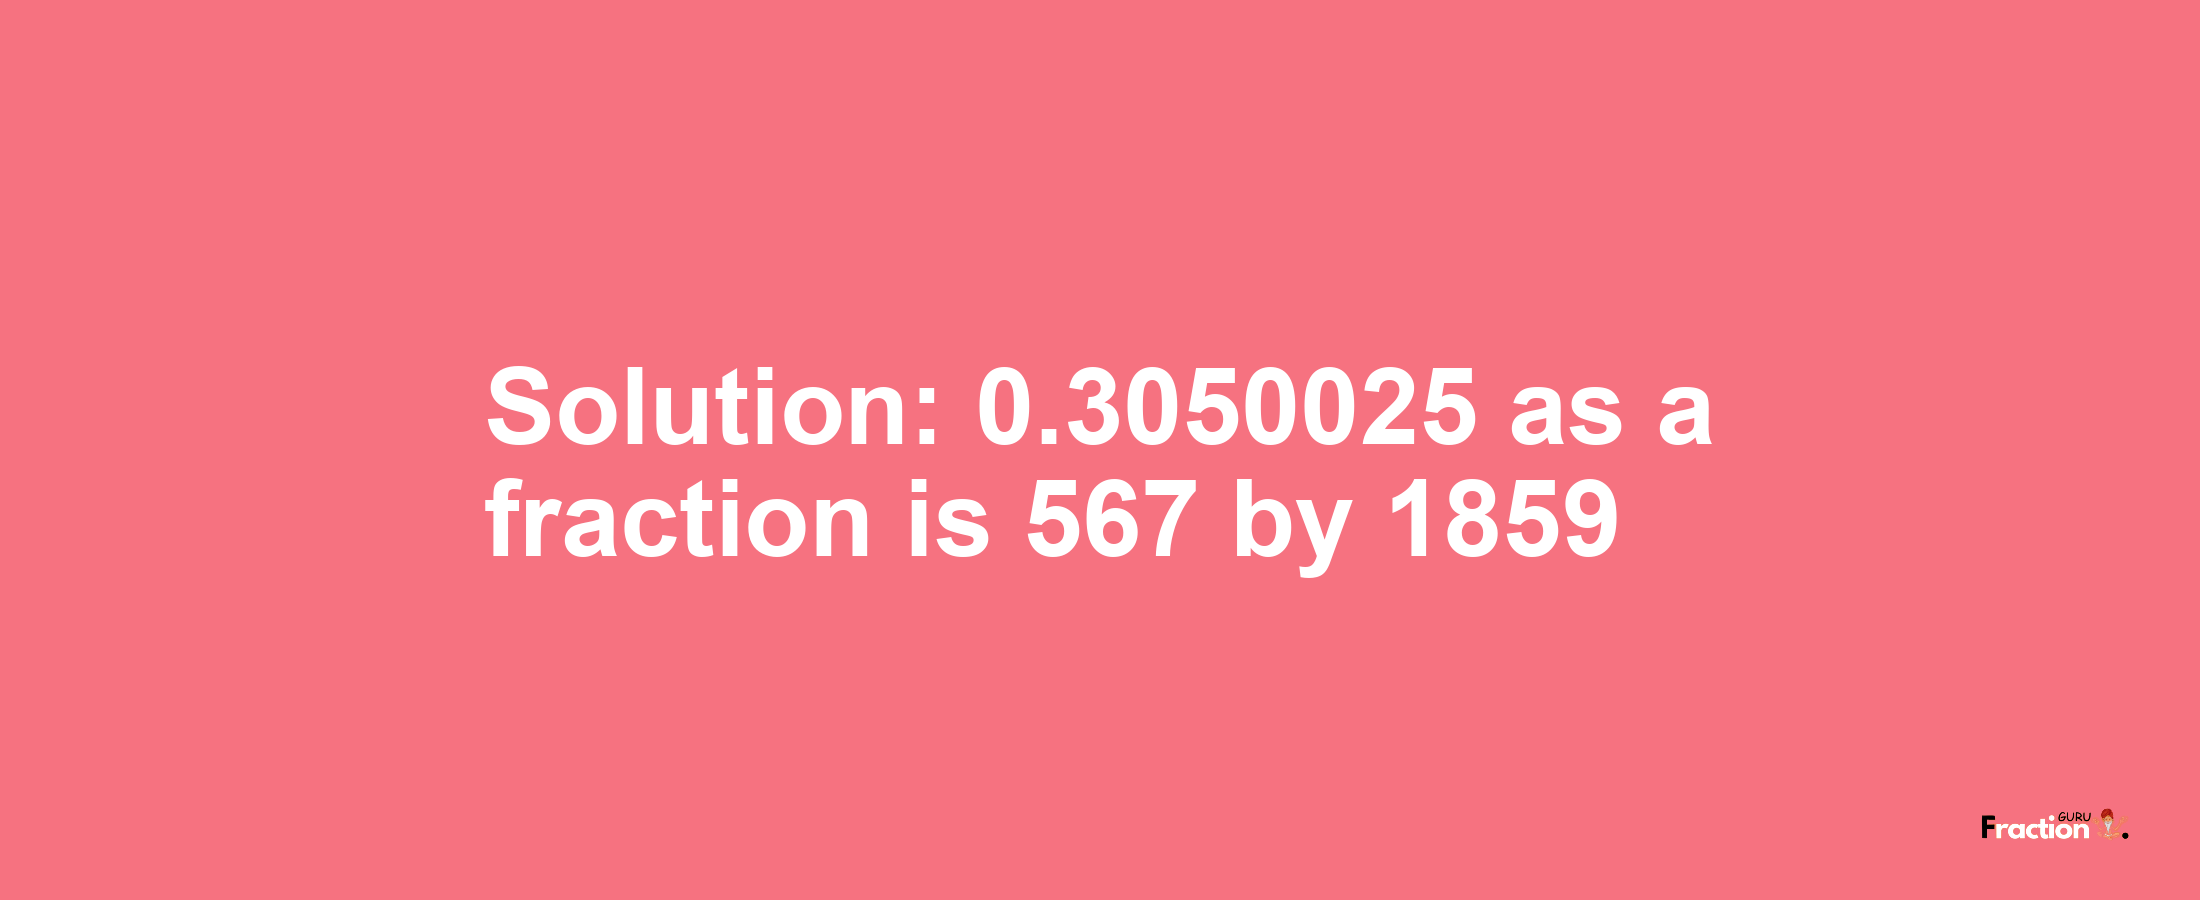 Solution:0.3050025 as a fraction is 567/1859